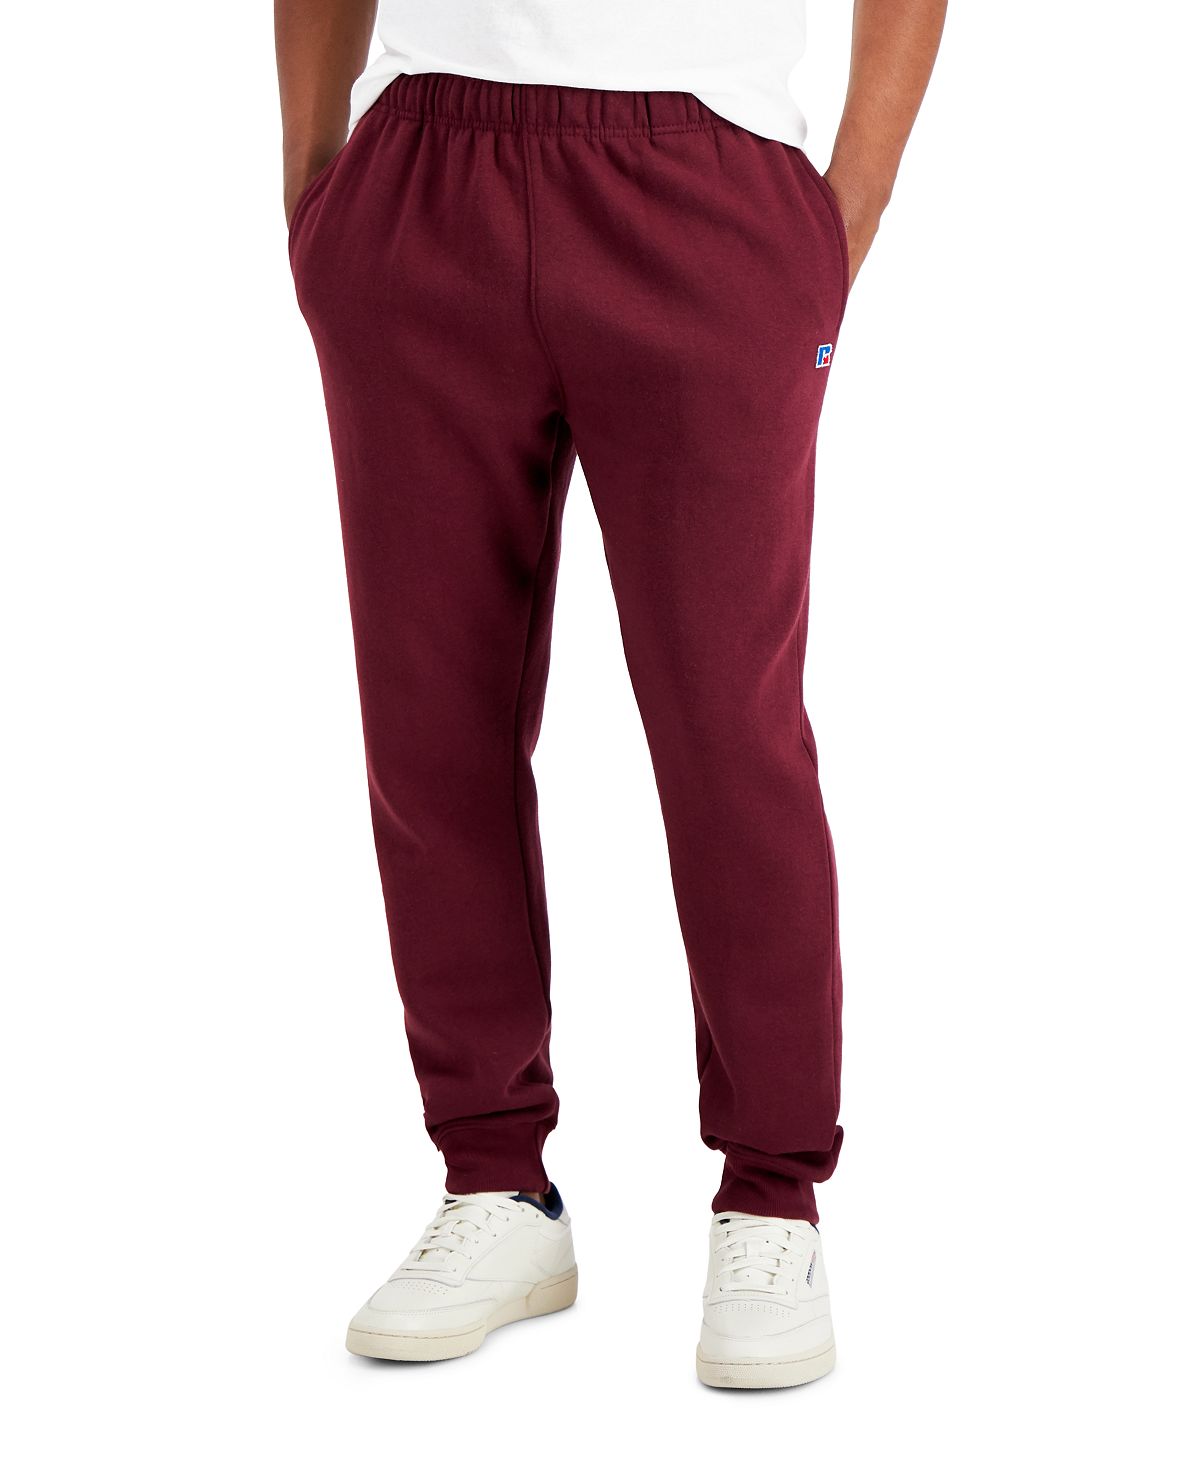 Russell Athletic Solid Fleece Joggers Maroon